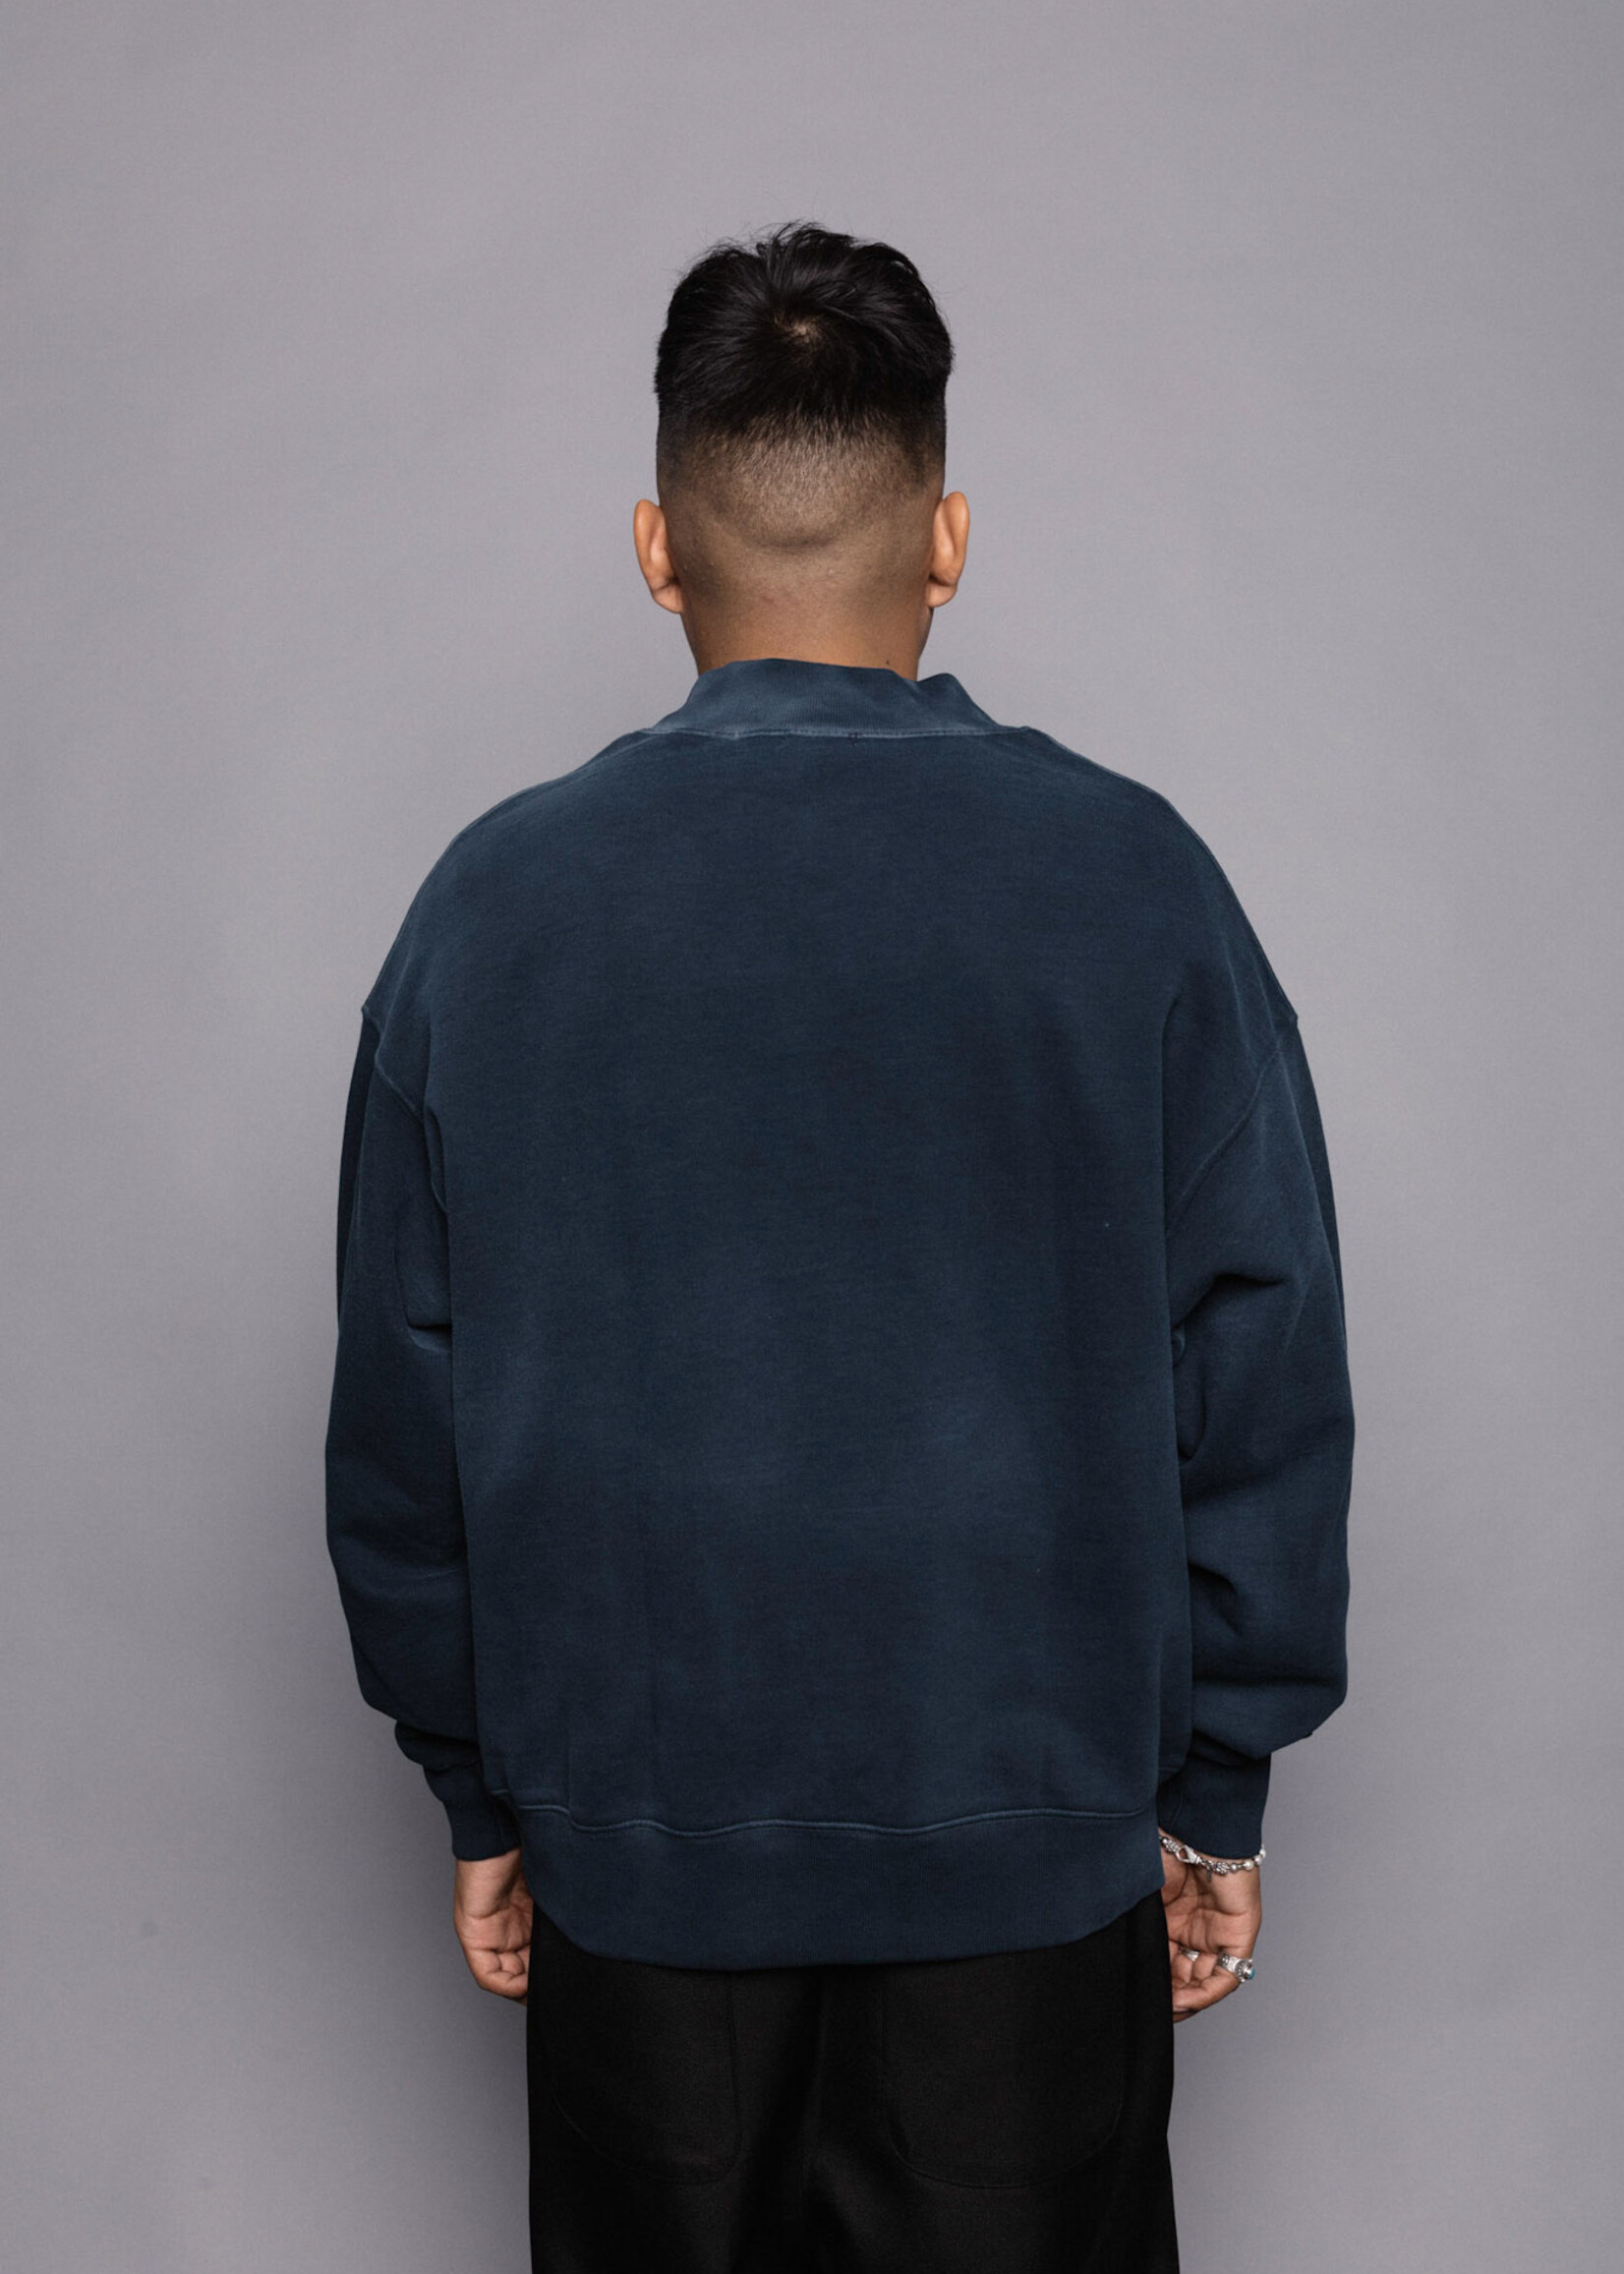 WILLY CHAVARRIA NOW or NEVER EXCLUSIVE: Mockneck Sweatshirt in Navy